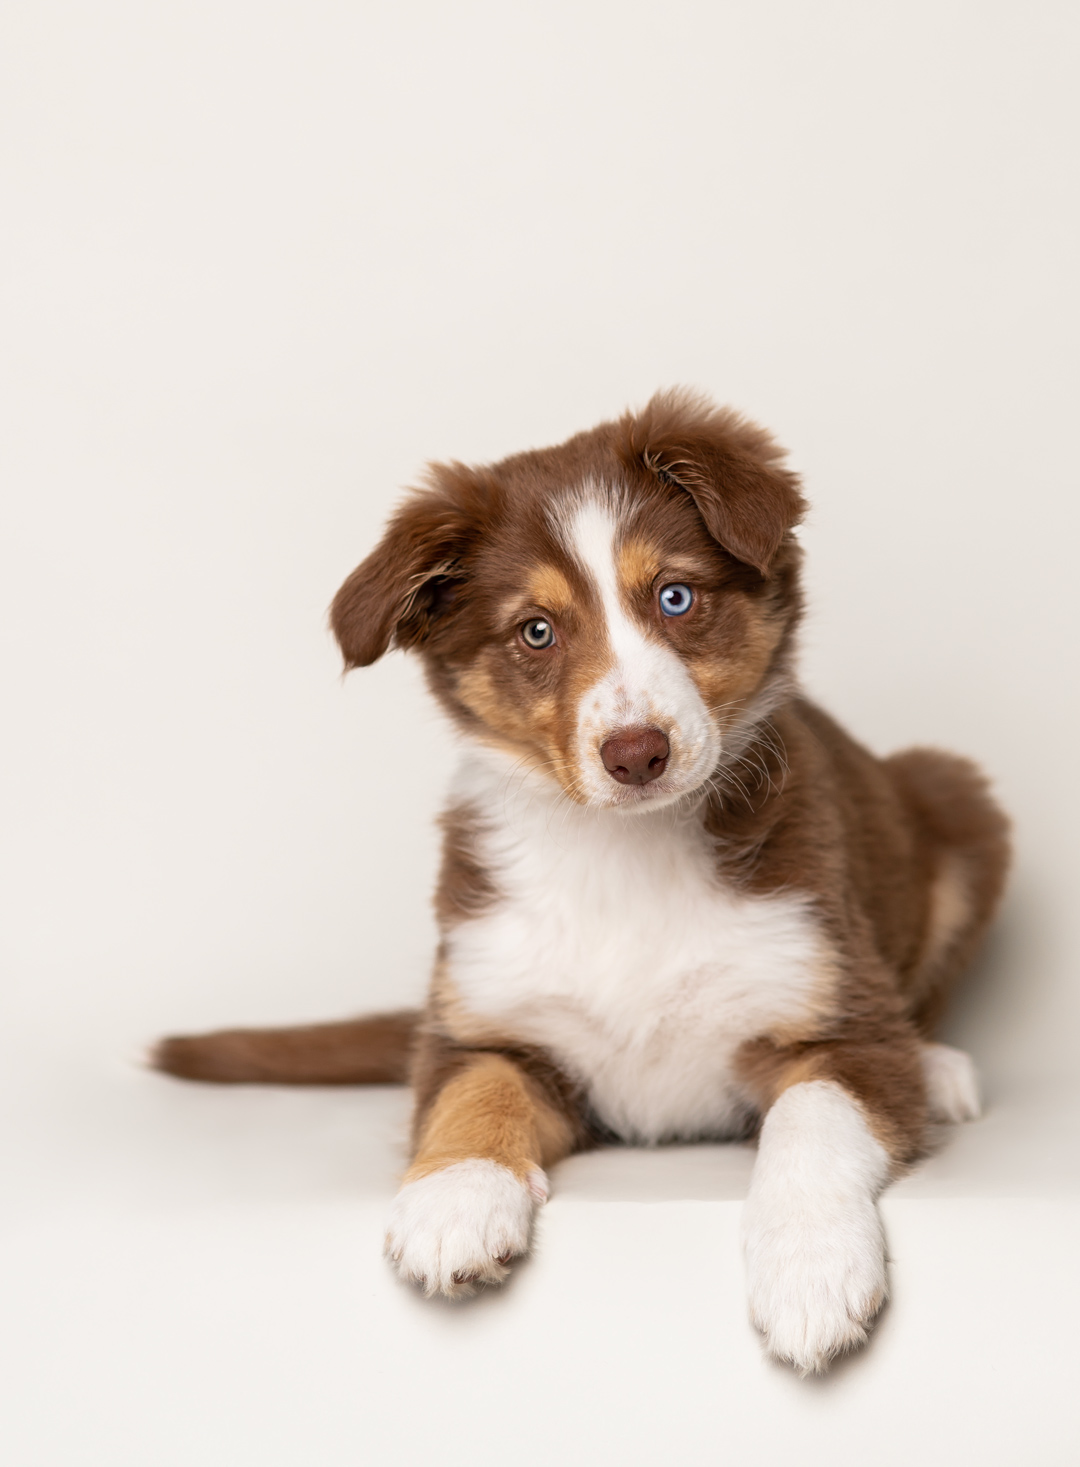 Cute 8 week old aussie shephard puppy with two different colored eyes.